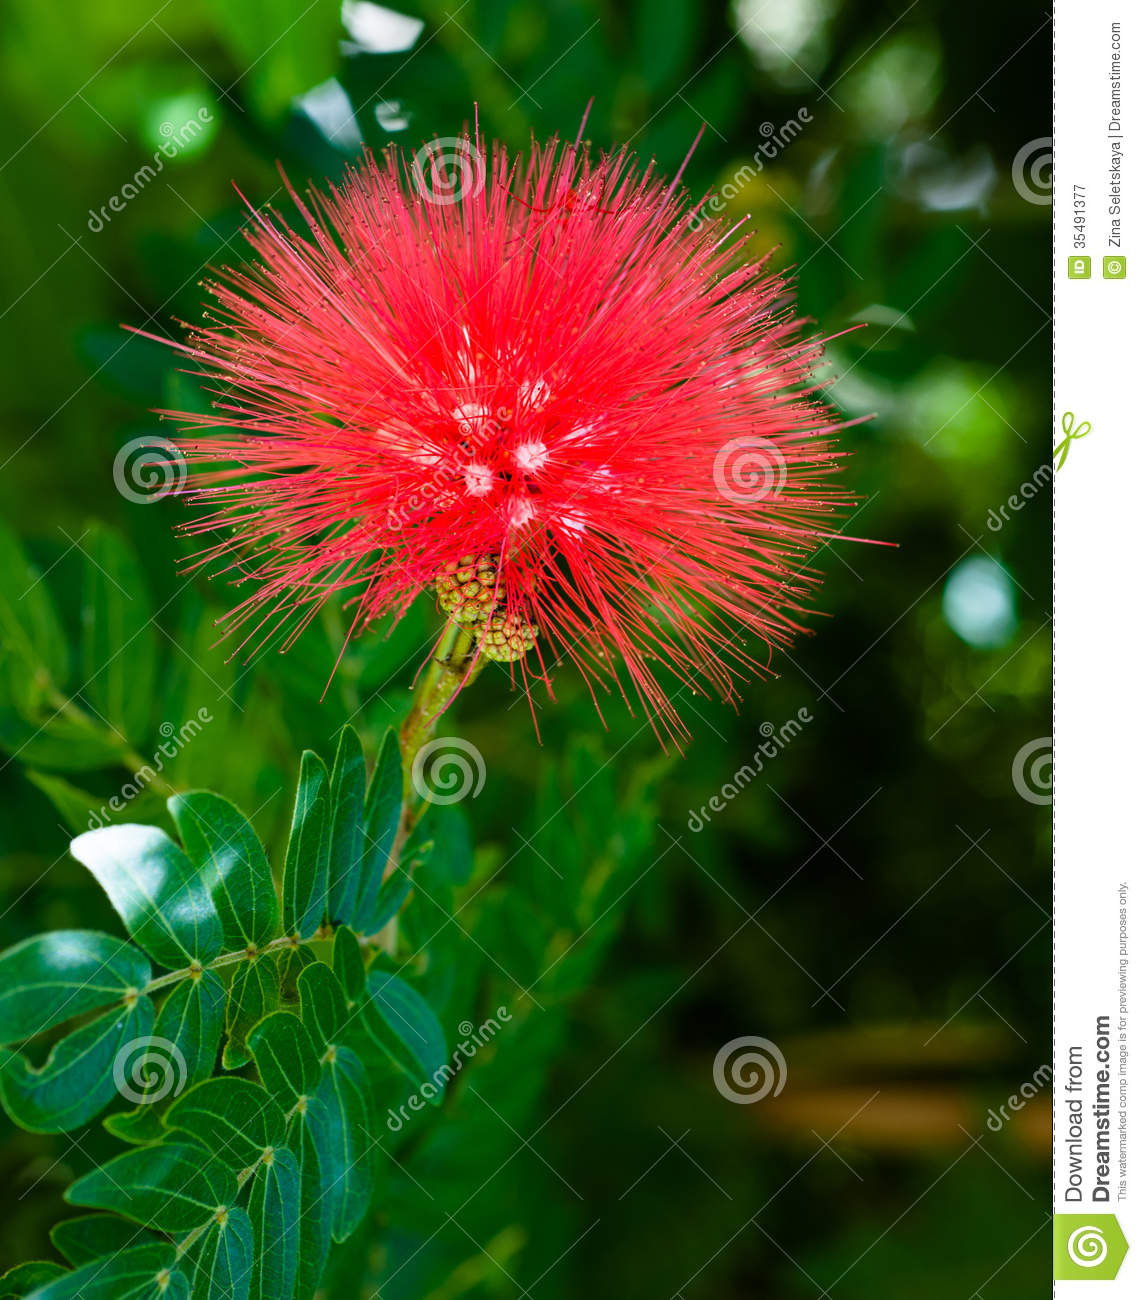 Delicate Flower With Beautiful Red Spikes Blooming In The Garden 